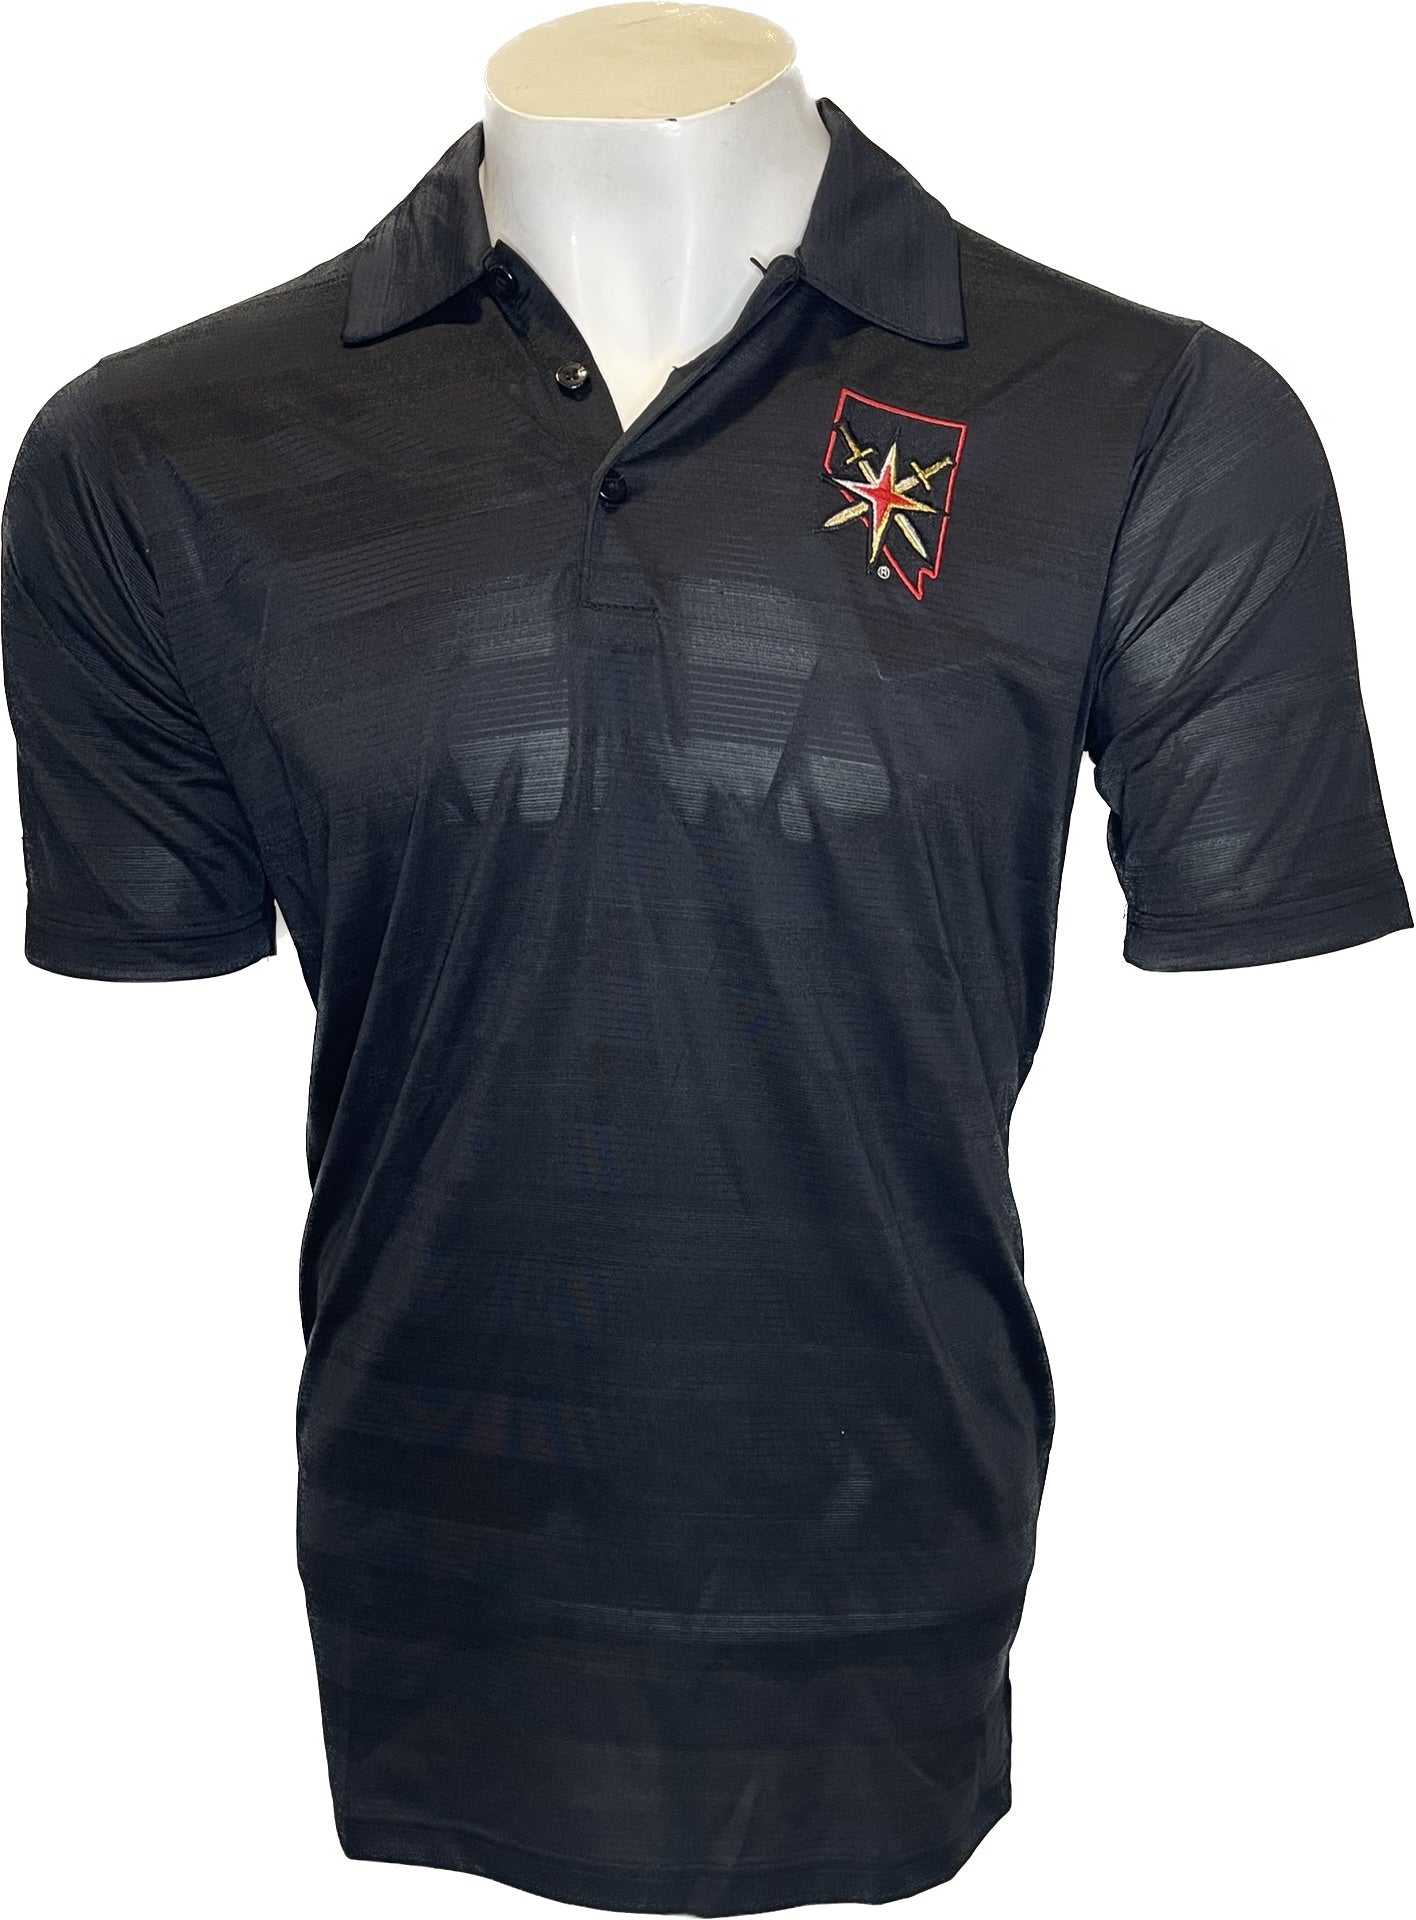 Vegas Golden Knights Mens Compass Polo - Black With Star Logo